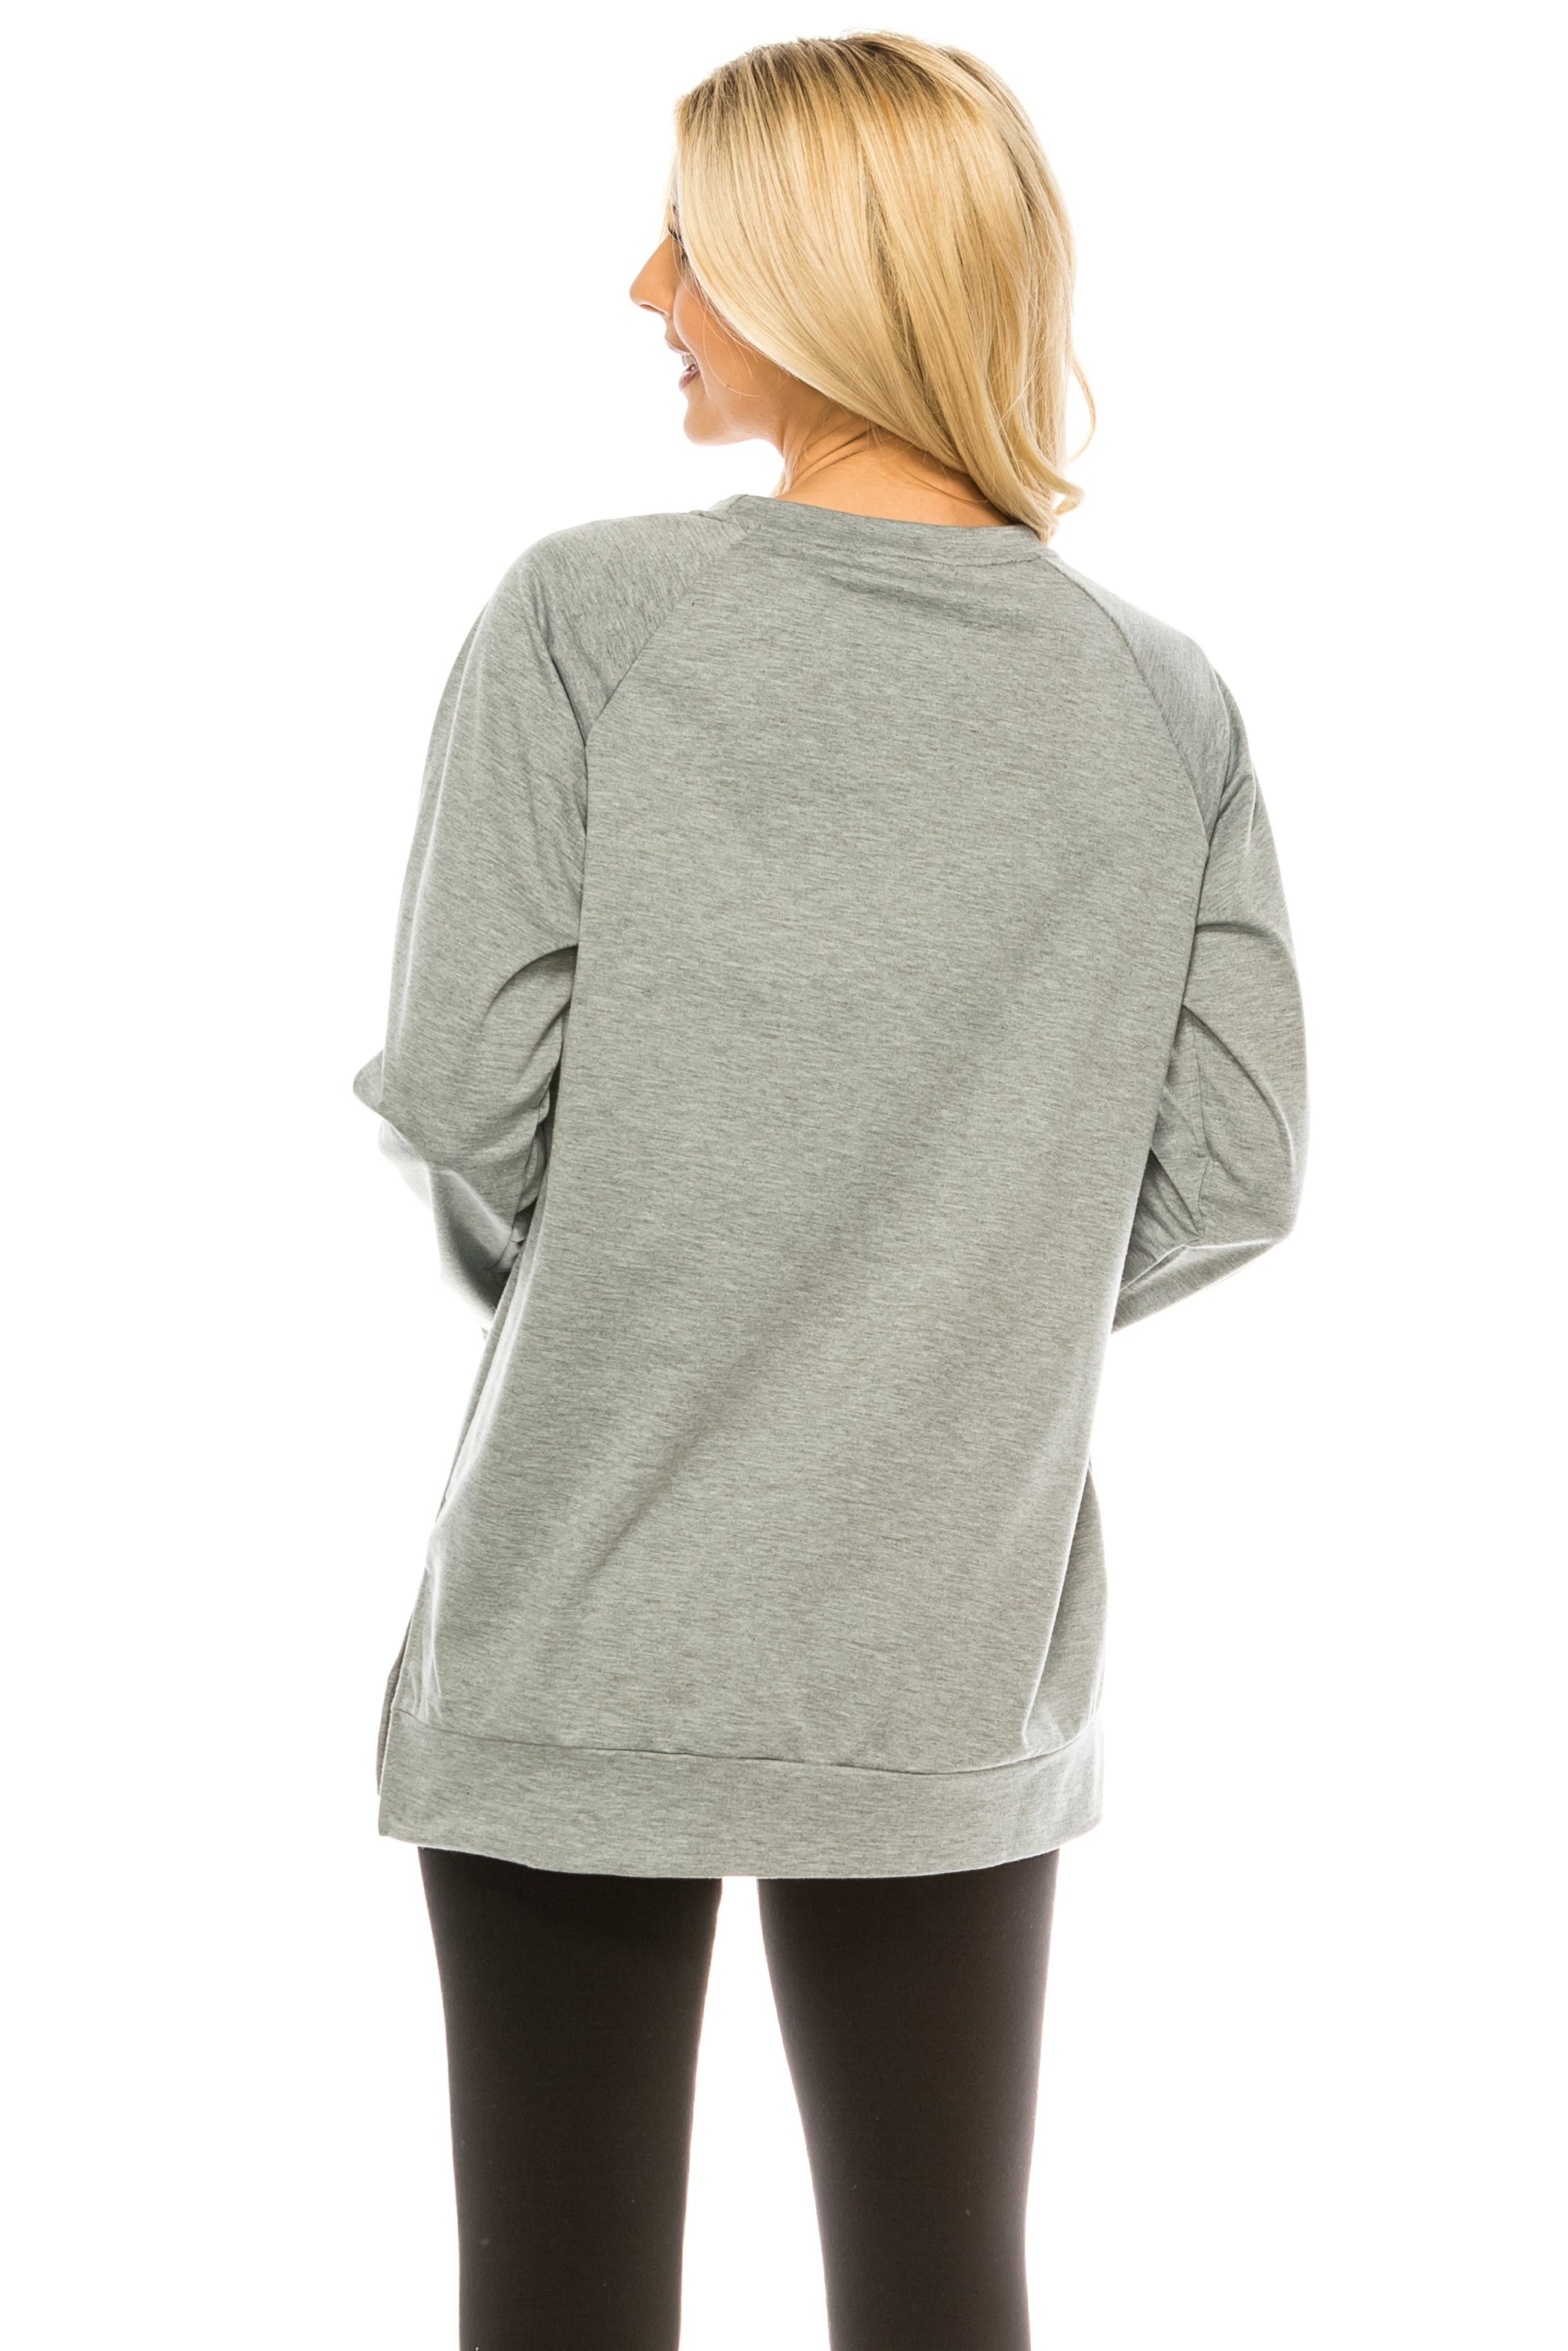 Haute Edition Women's Colorblock and Solid Spring Crewneck Raglan Tee With Plus DAILYHAUTE